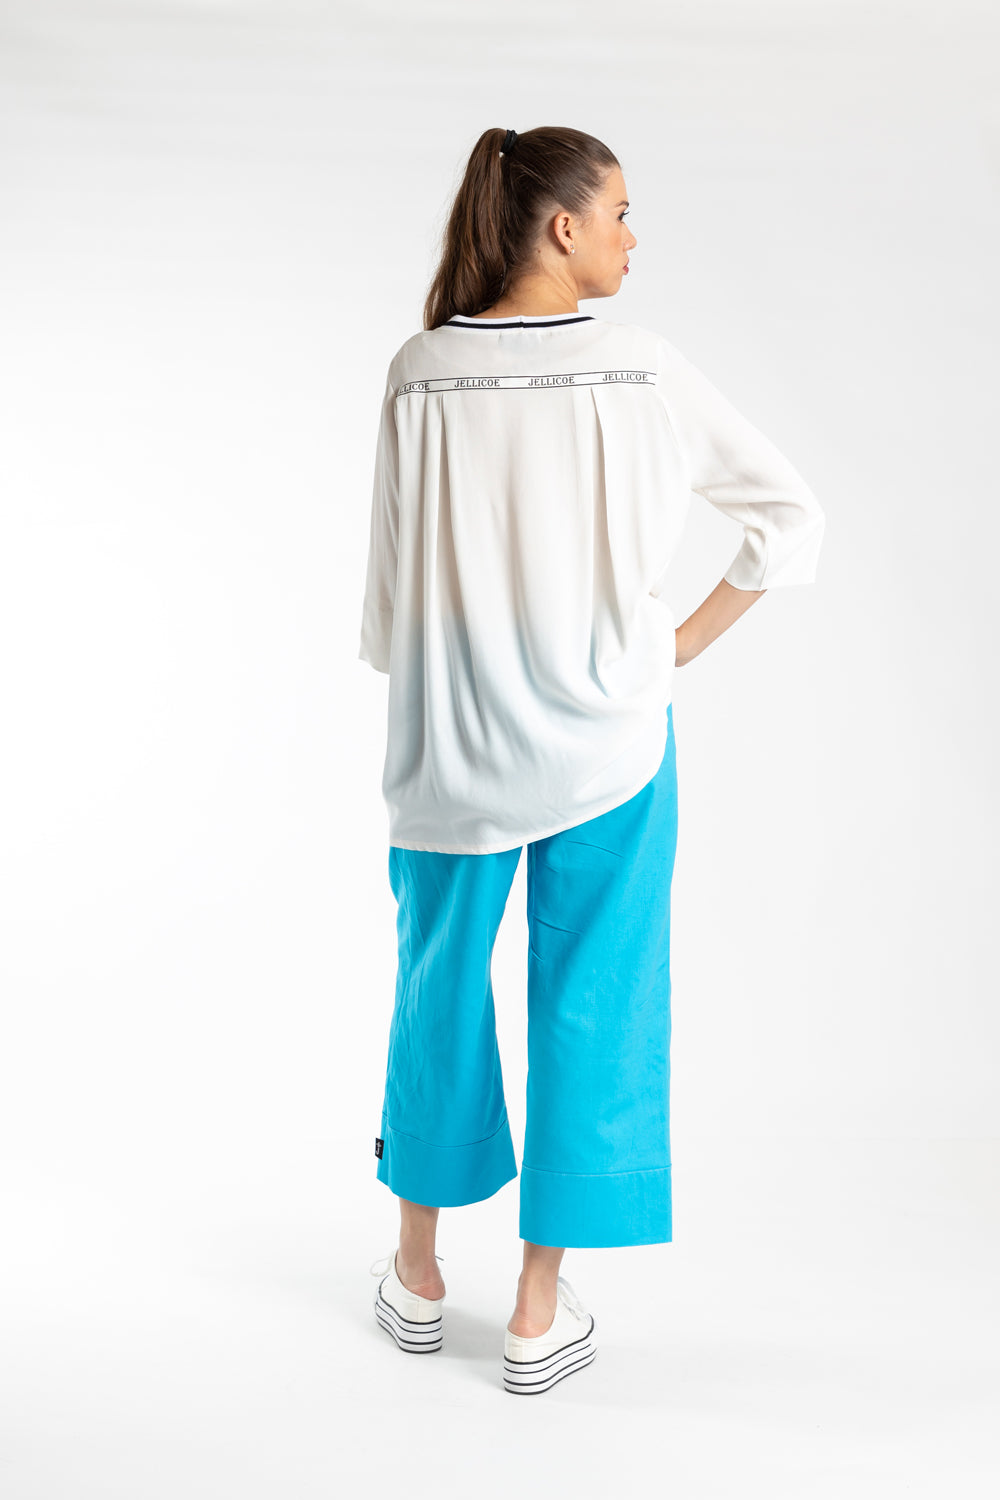 JELLICOE TEAL PANTS -  THE VOGUE STORE